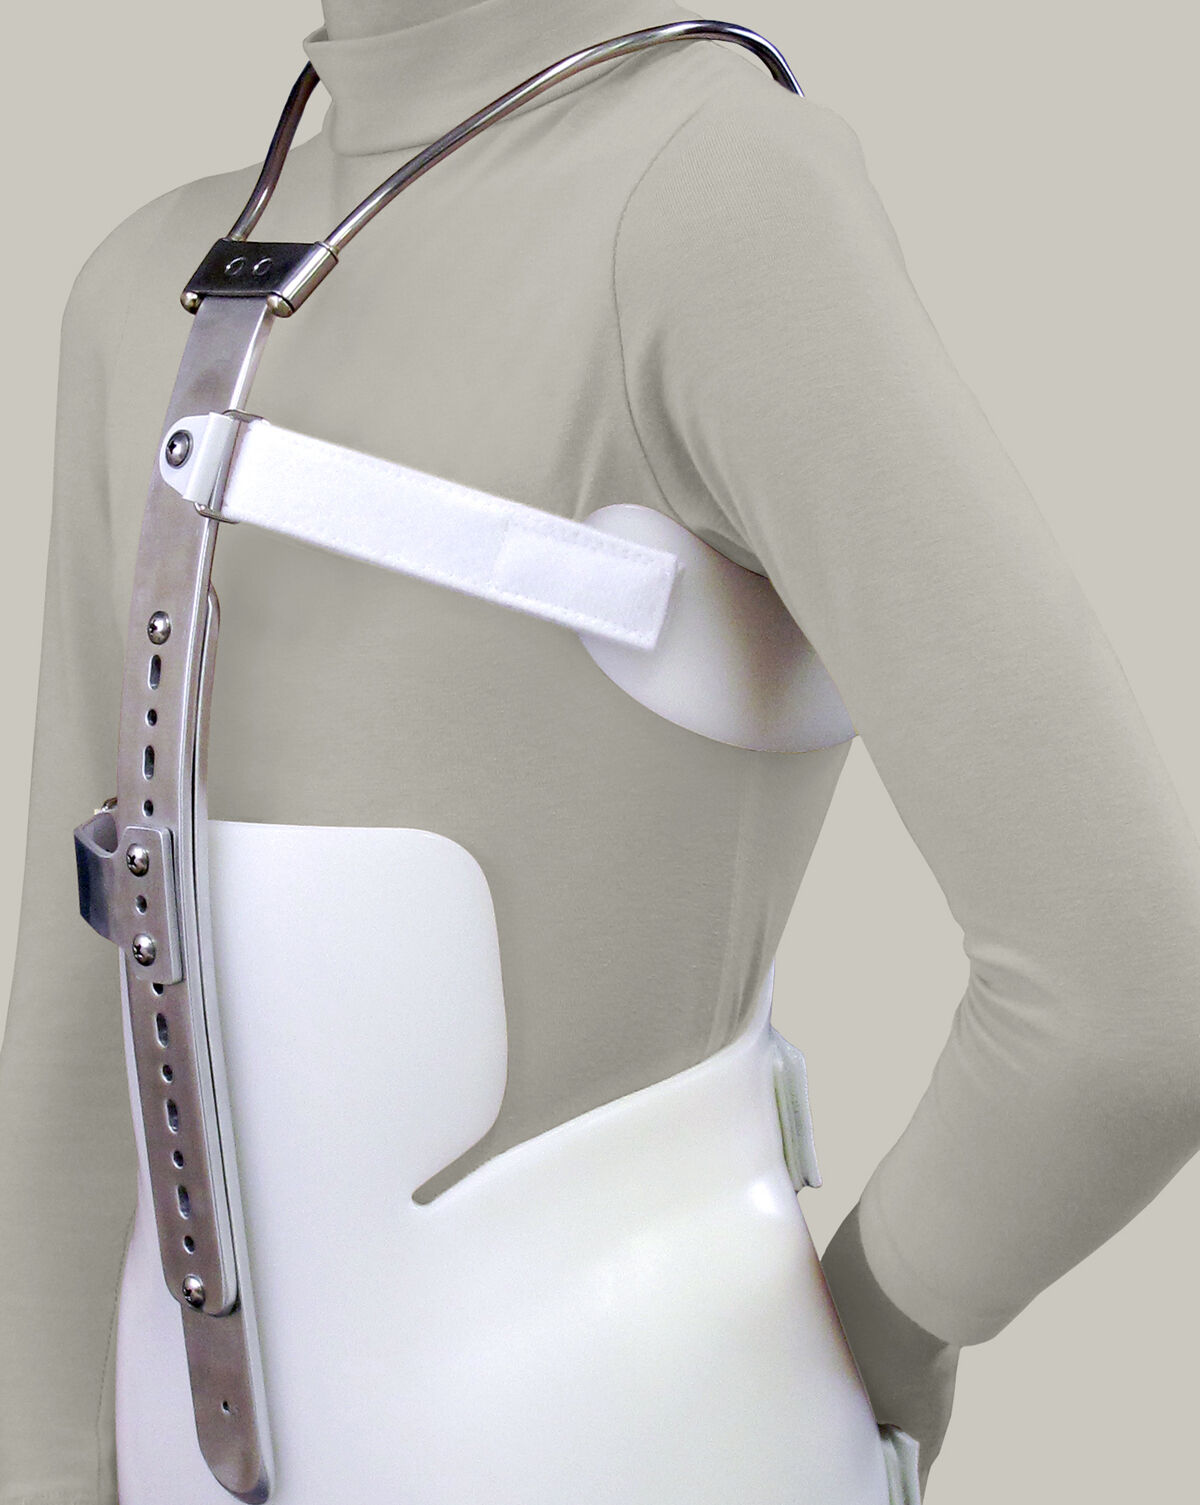 Milwaukee spinal brace with ancillary and axillary pads attached